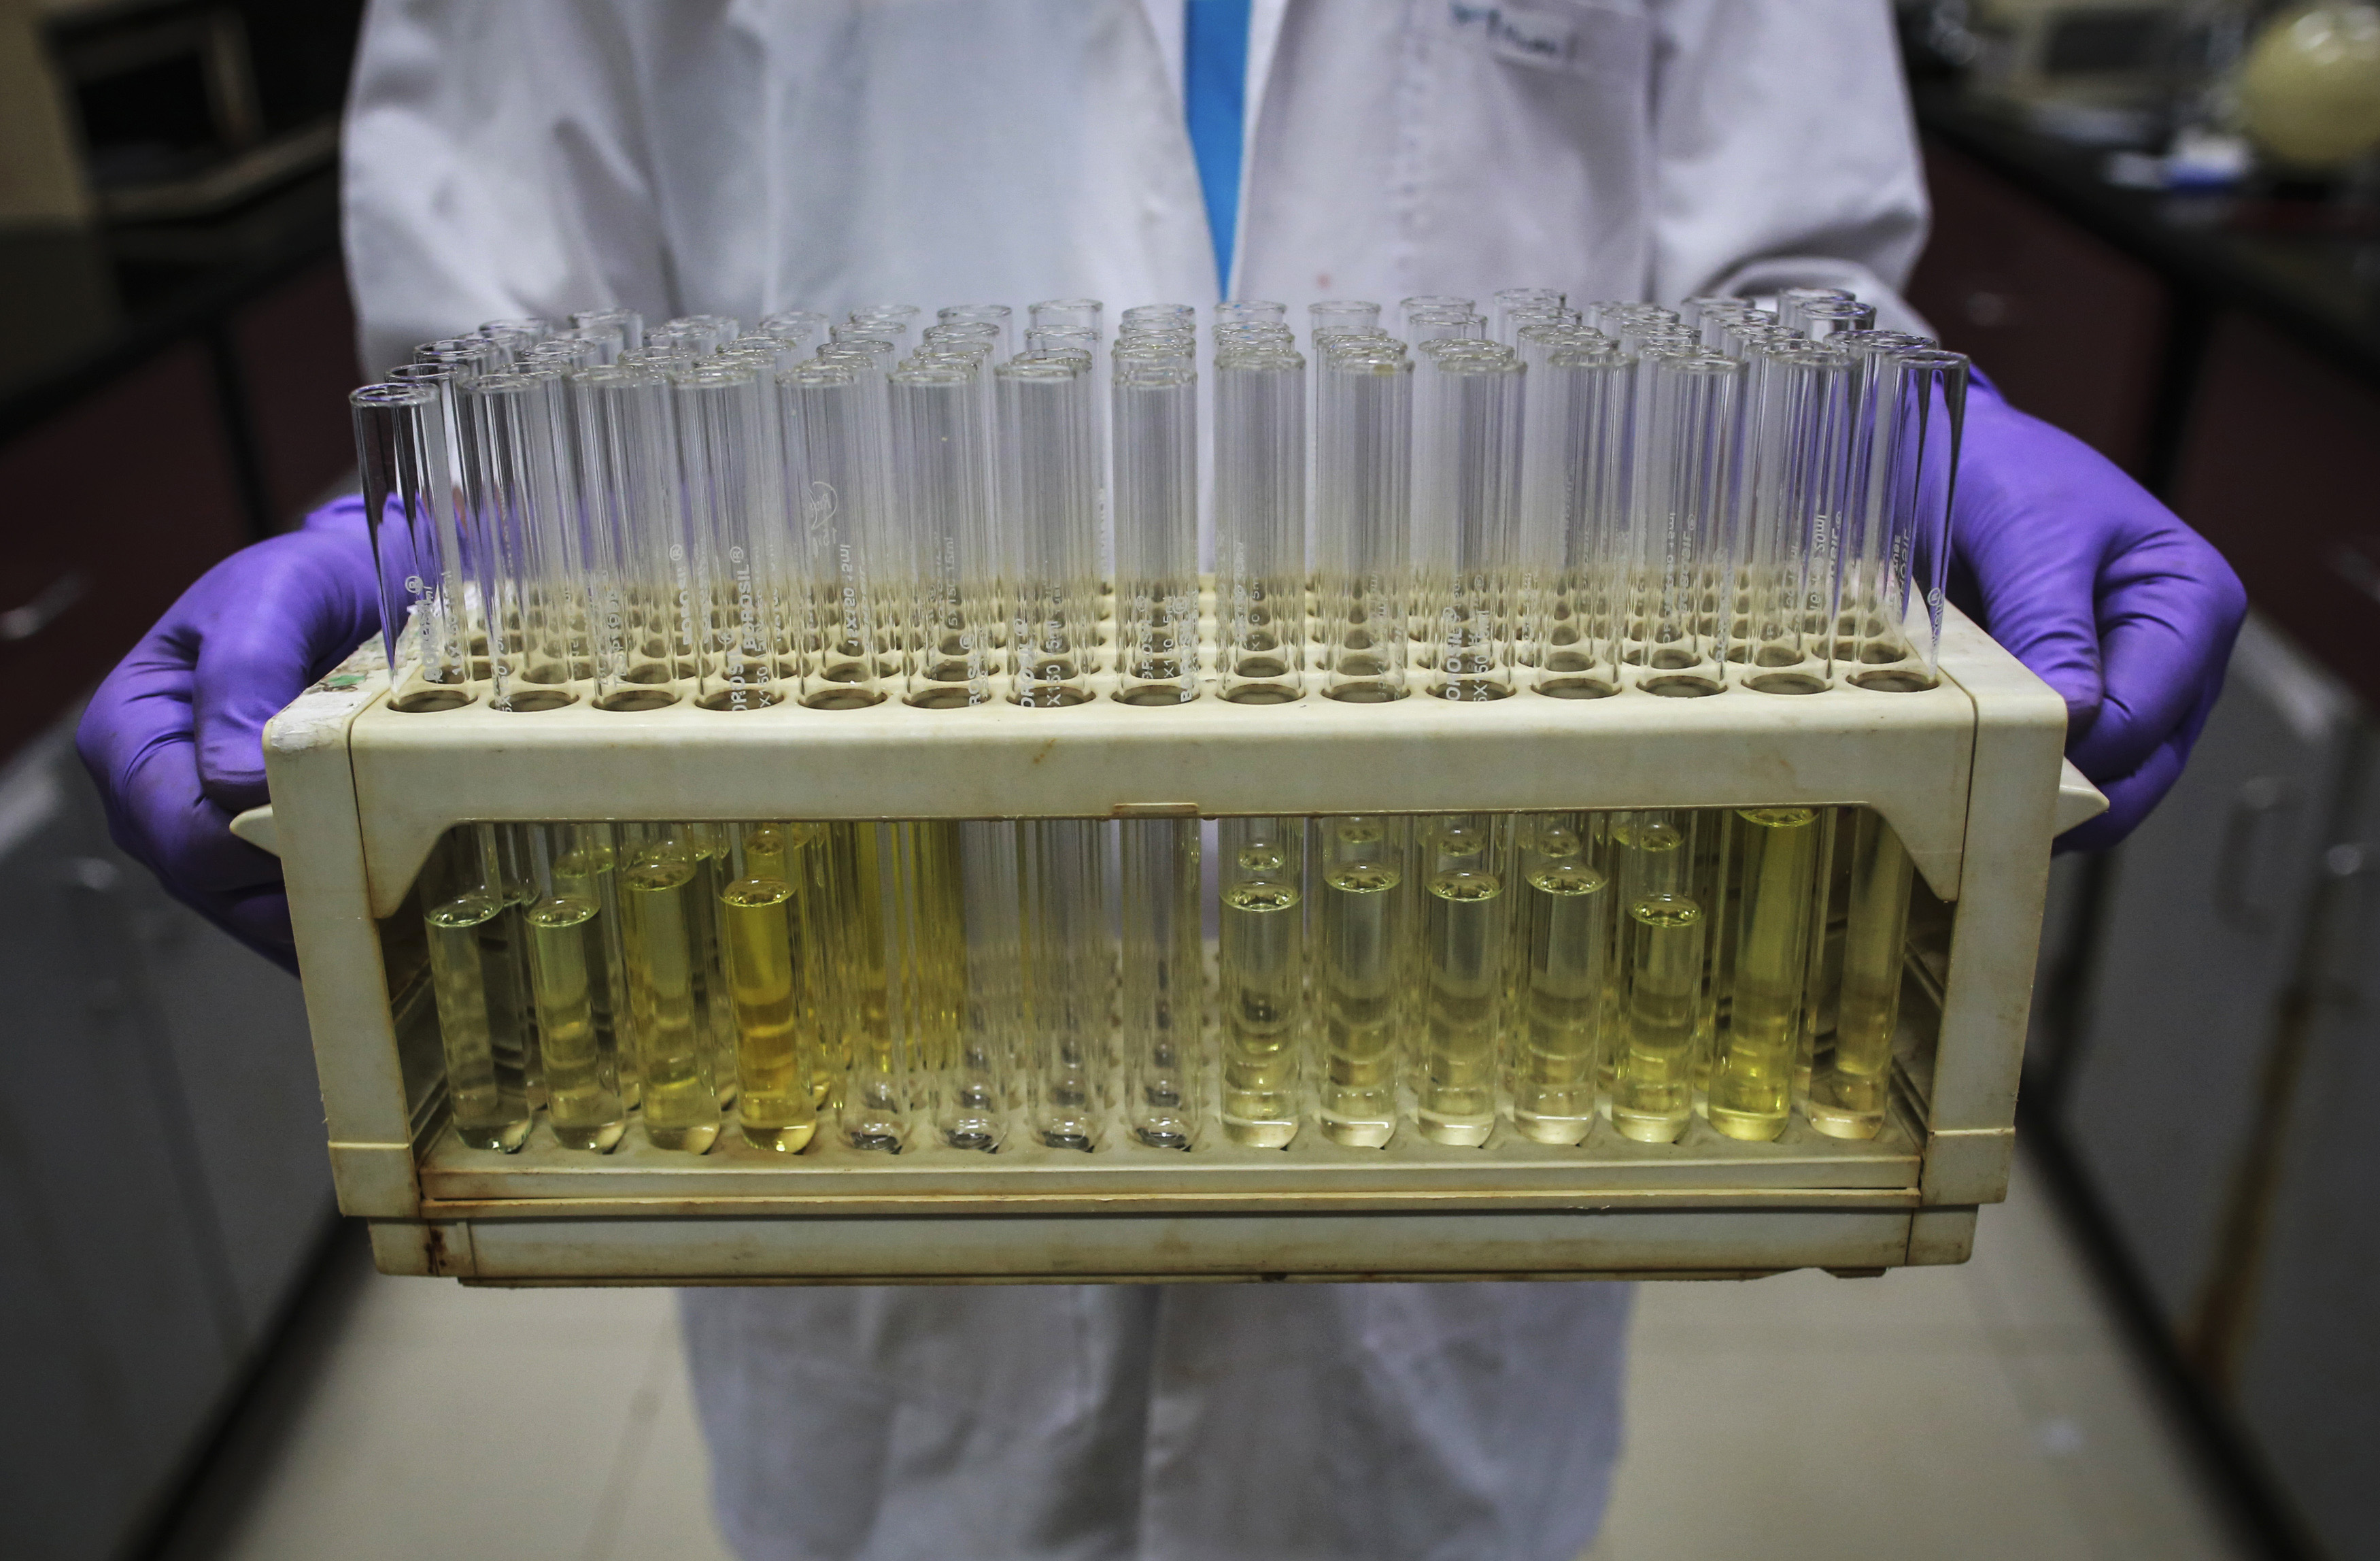 An employee carries test tubes inside a laboratory at Piramal's Research Centre in Mumbai